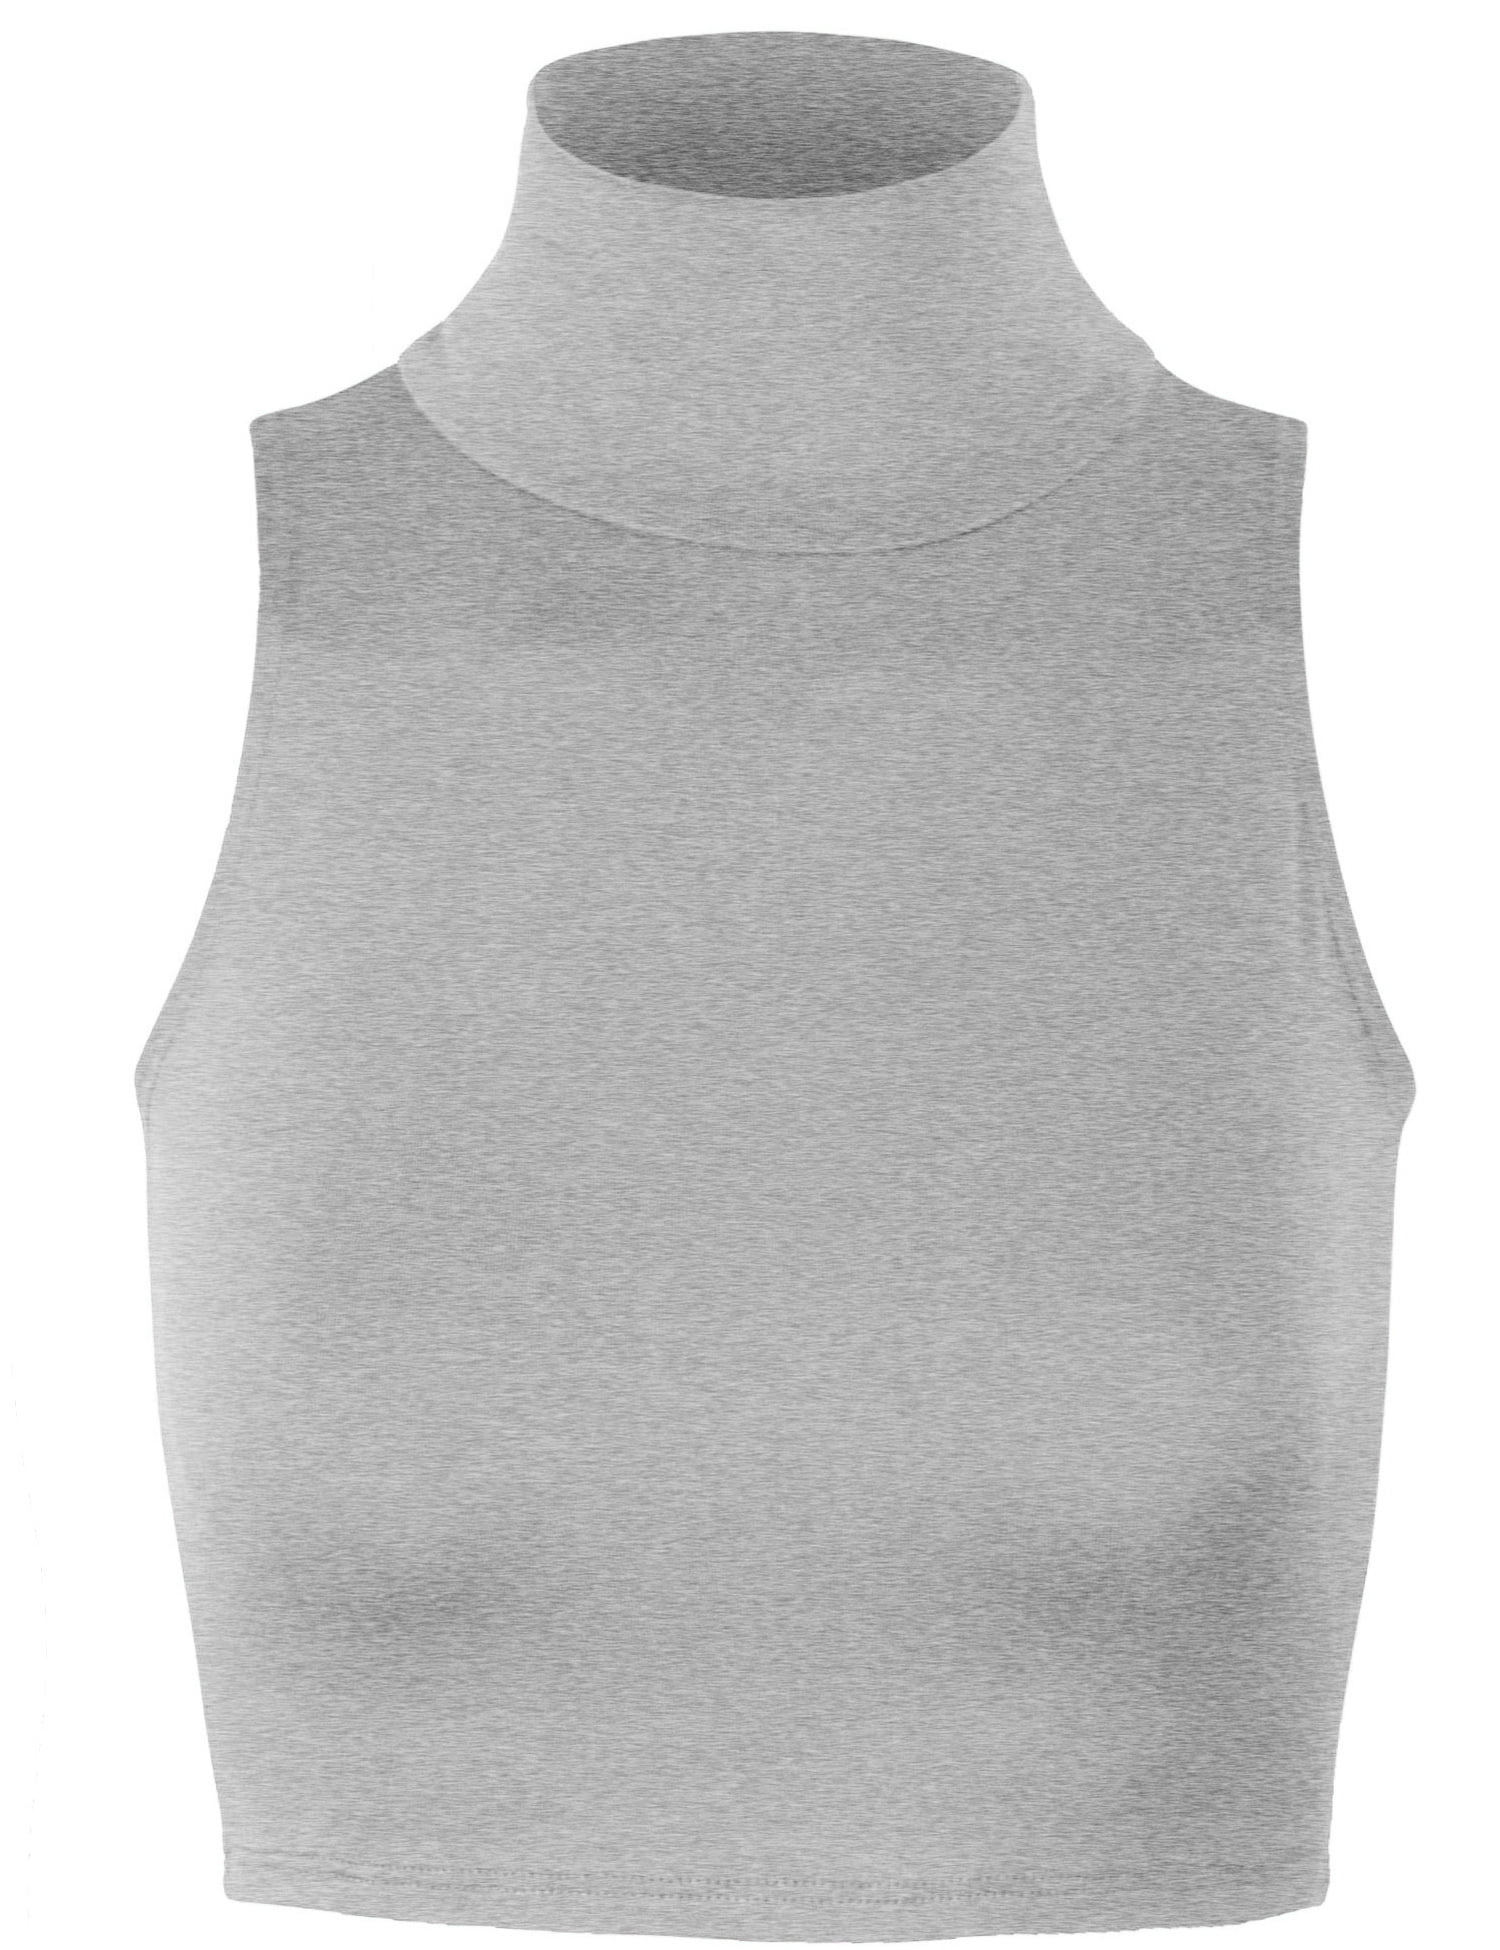 KOGMO Women's Lightweight Fitted Sleeveless Turtleneck Crop Top with ...